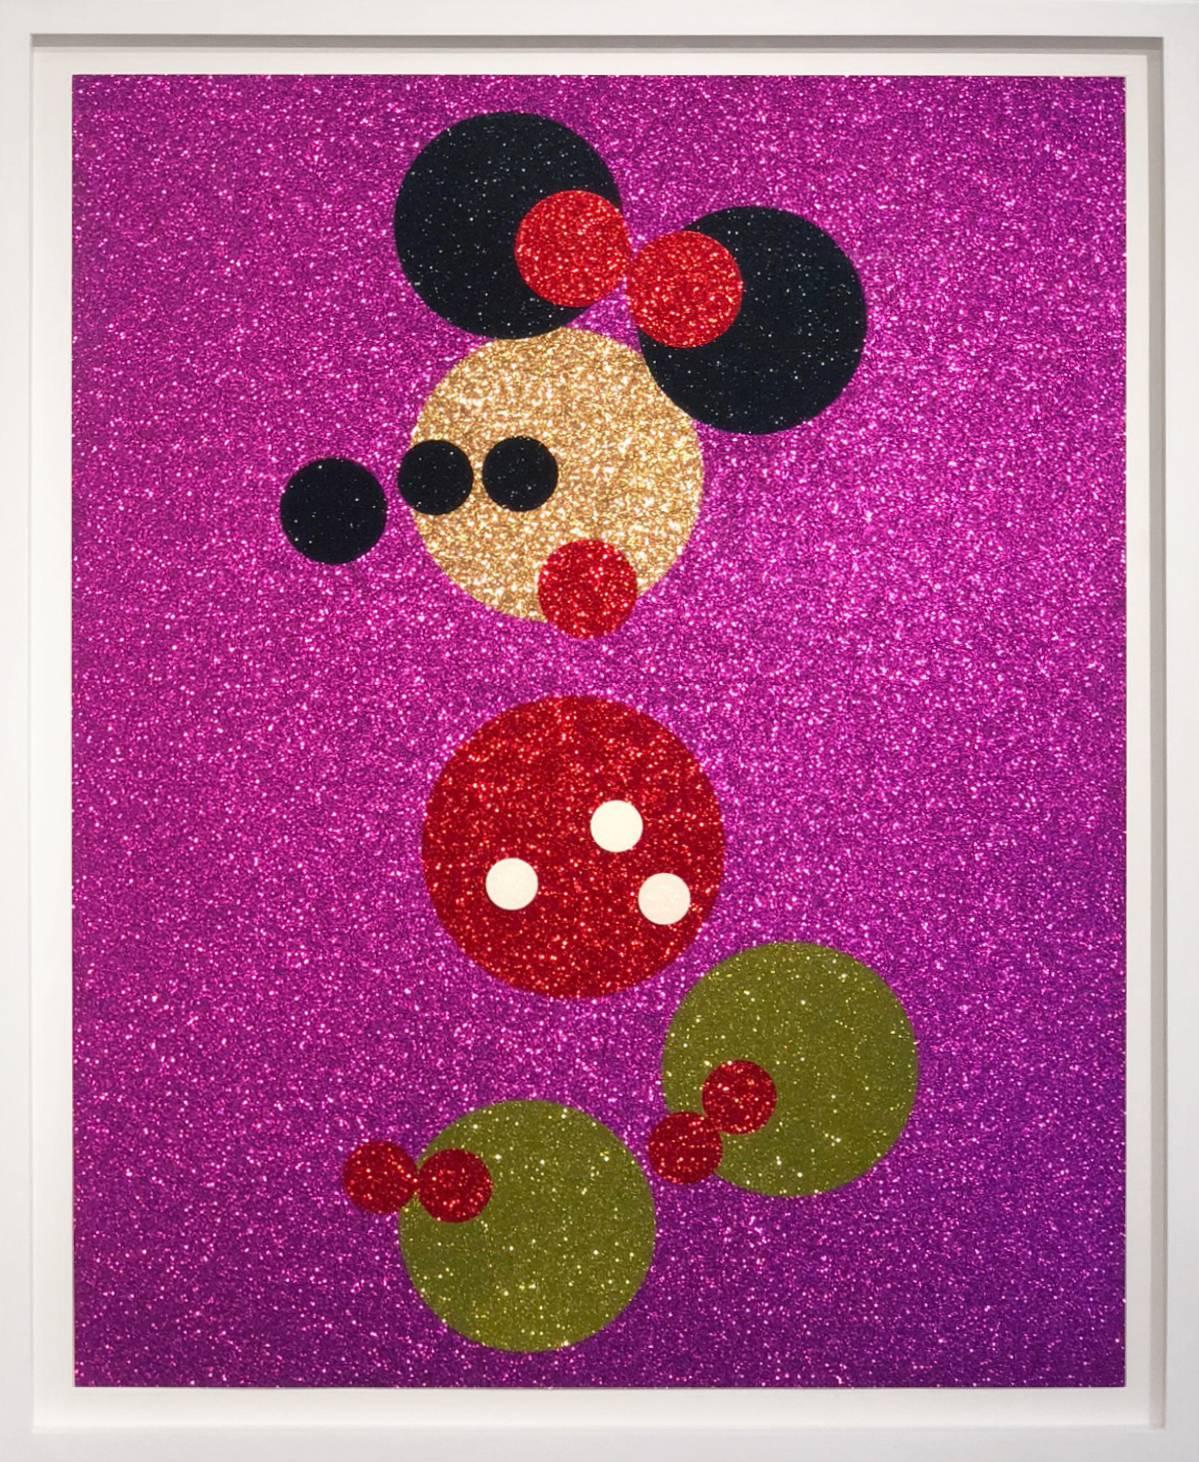 "Minnie" is of a matching set with "Mickey" and "Minnie." 

Set against a vibrant pink background and encrusted in glitter, Damien Hirst’s “Minnie” is a playful reimagining of the beloved Disney character, “Minnie Mouse.” Here, the cartoon character